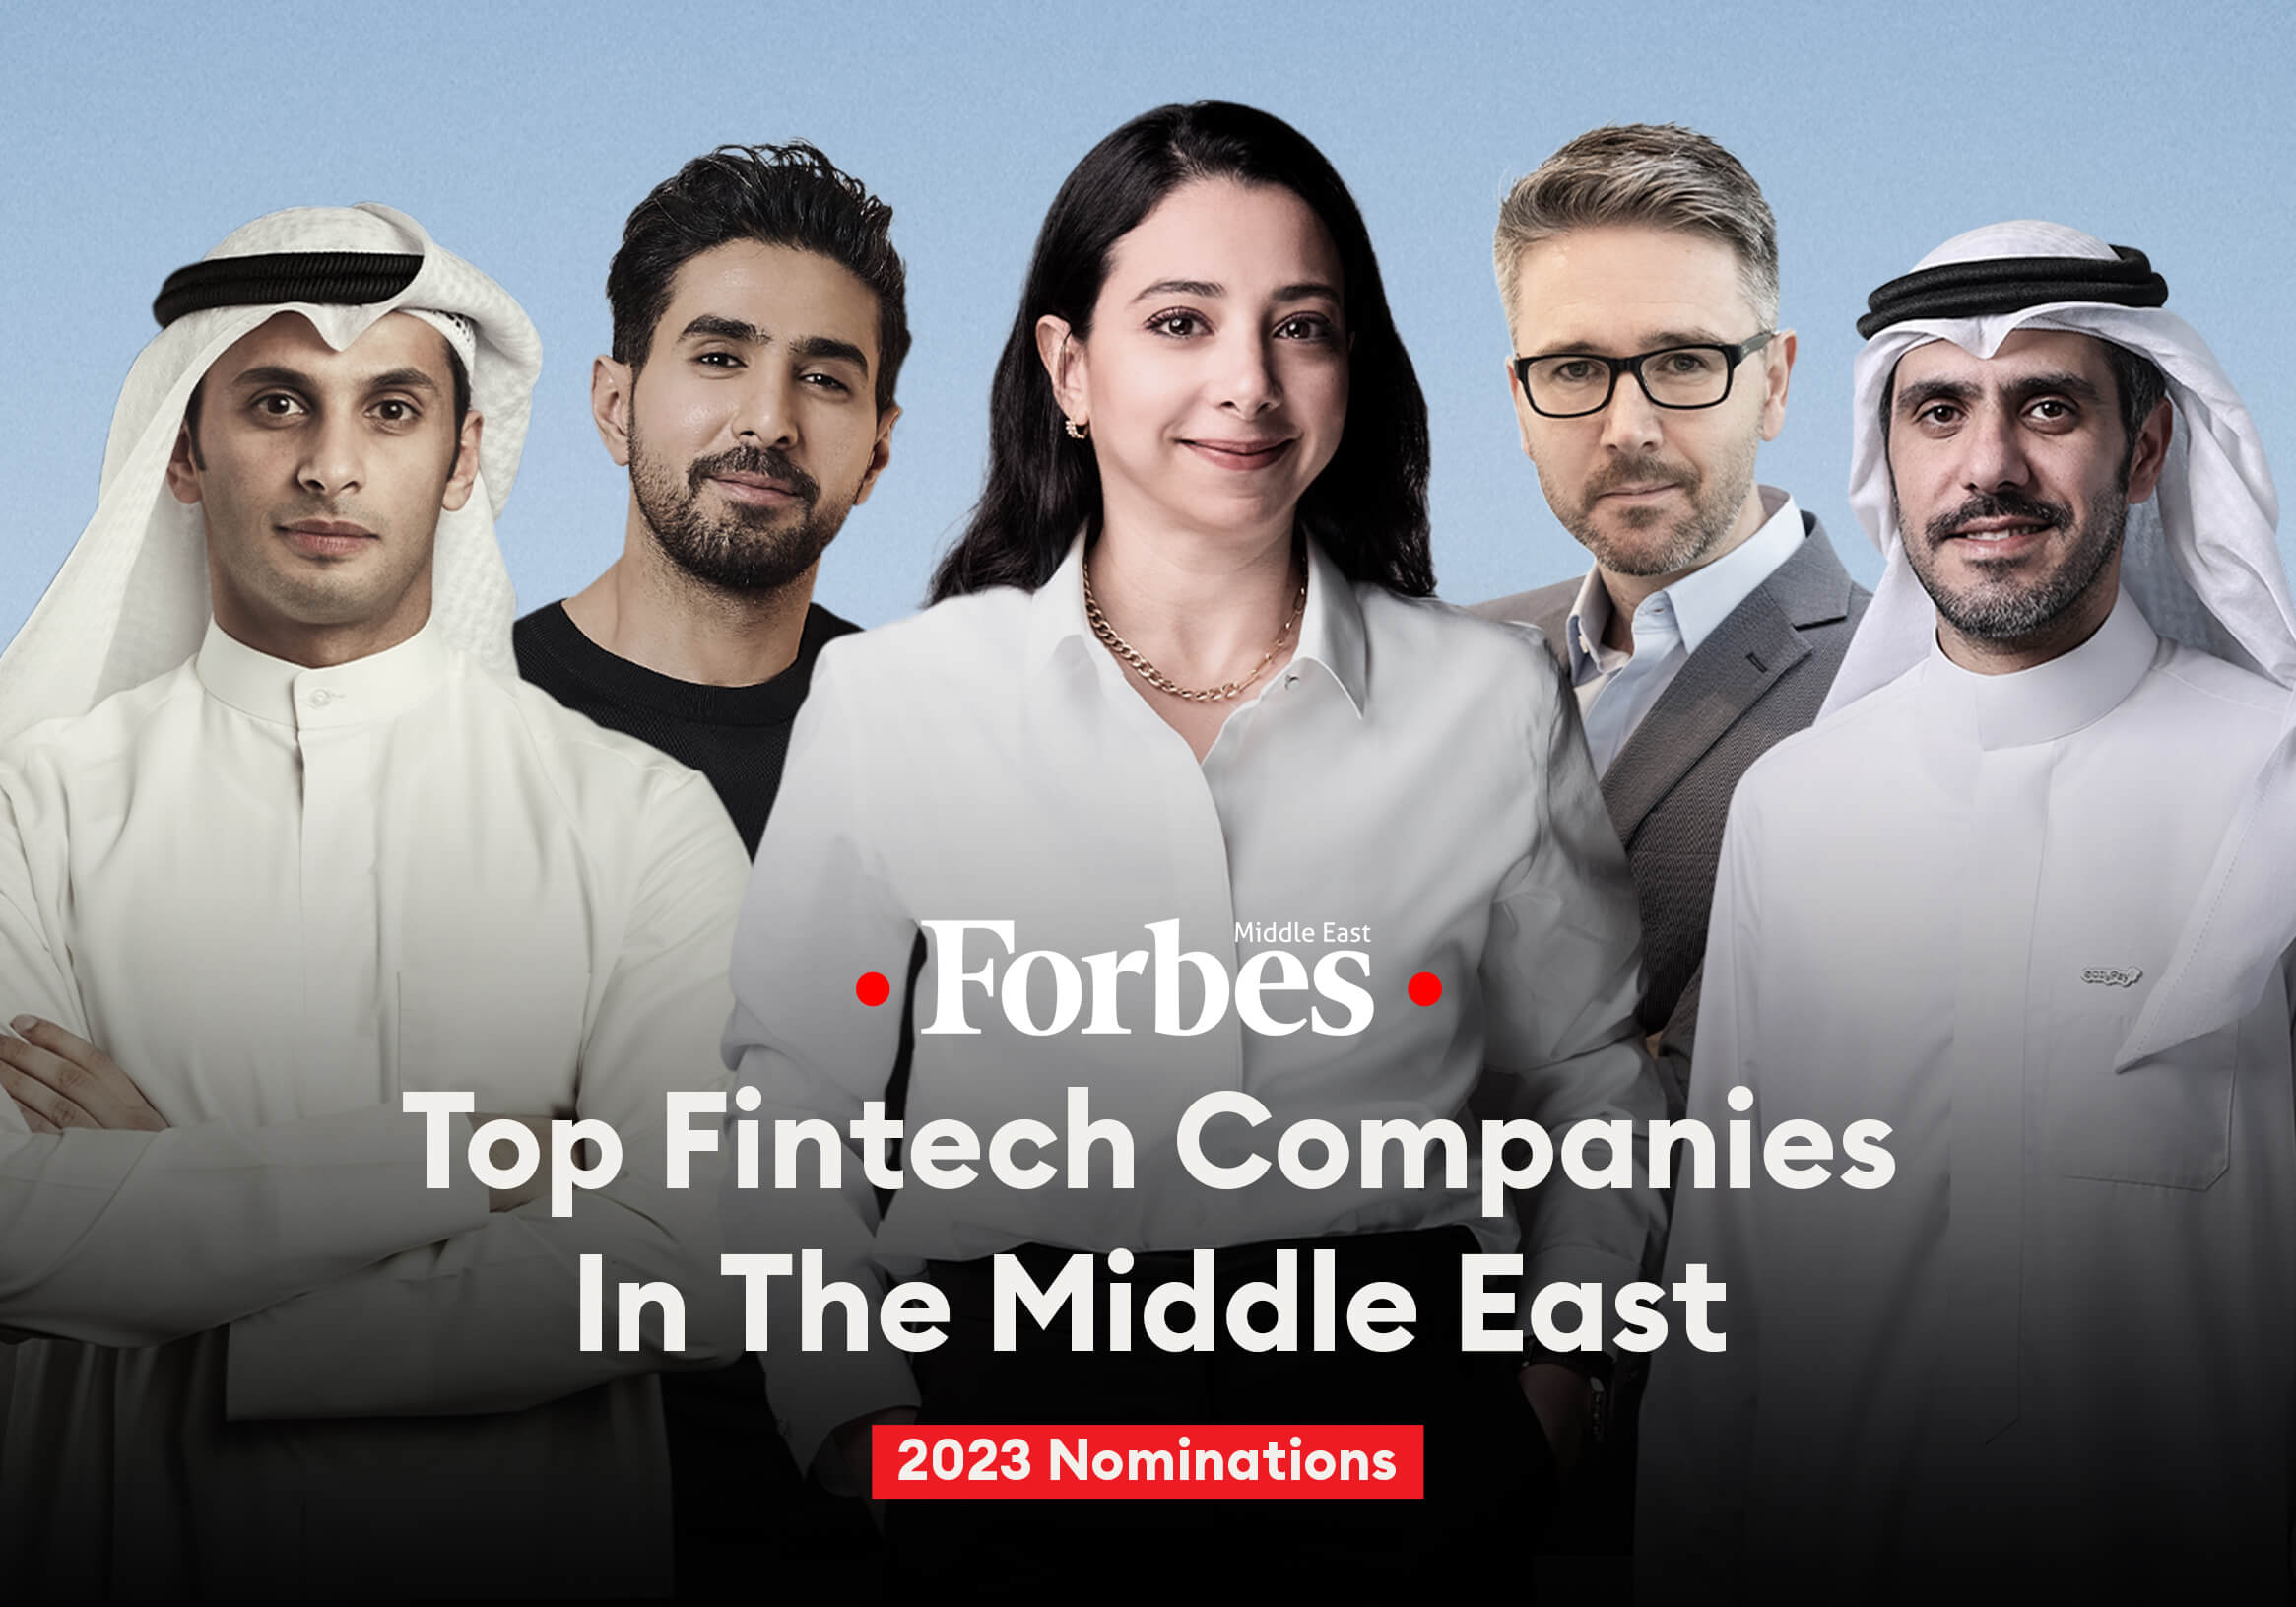  Top Fintech Companies In The Middle East 2023